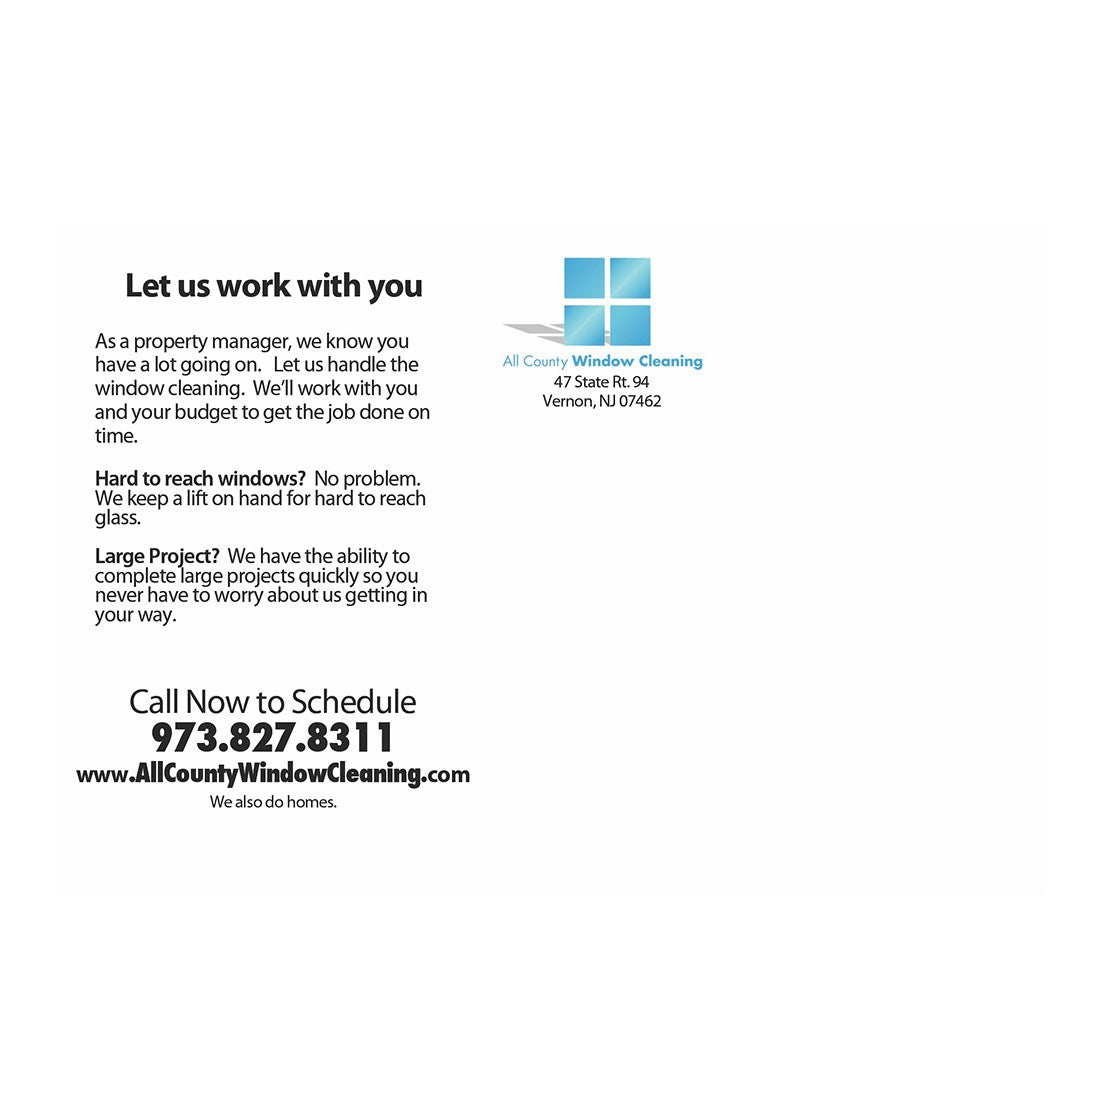 Housing Association Manager Design Suite - Small Postcard - Back View